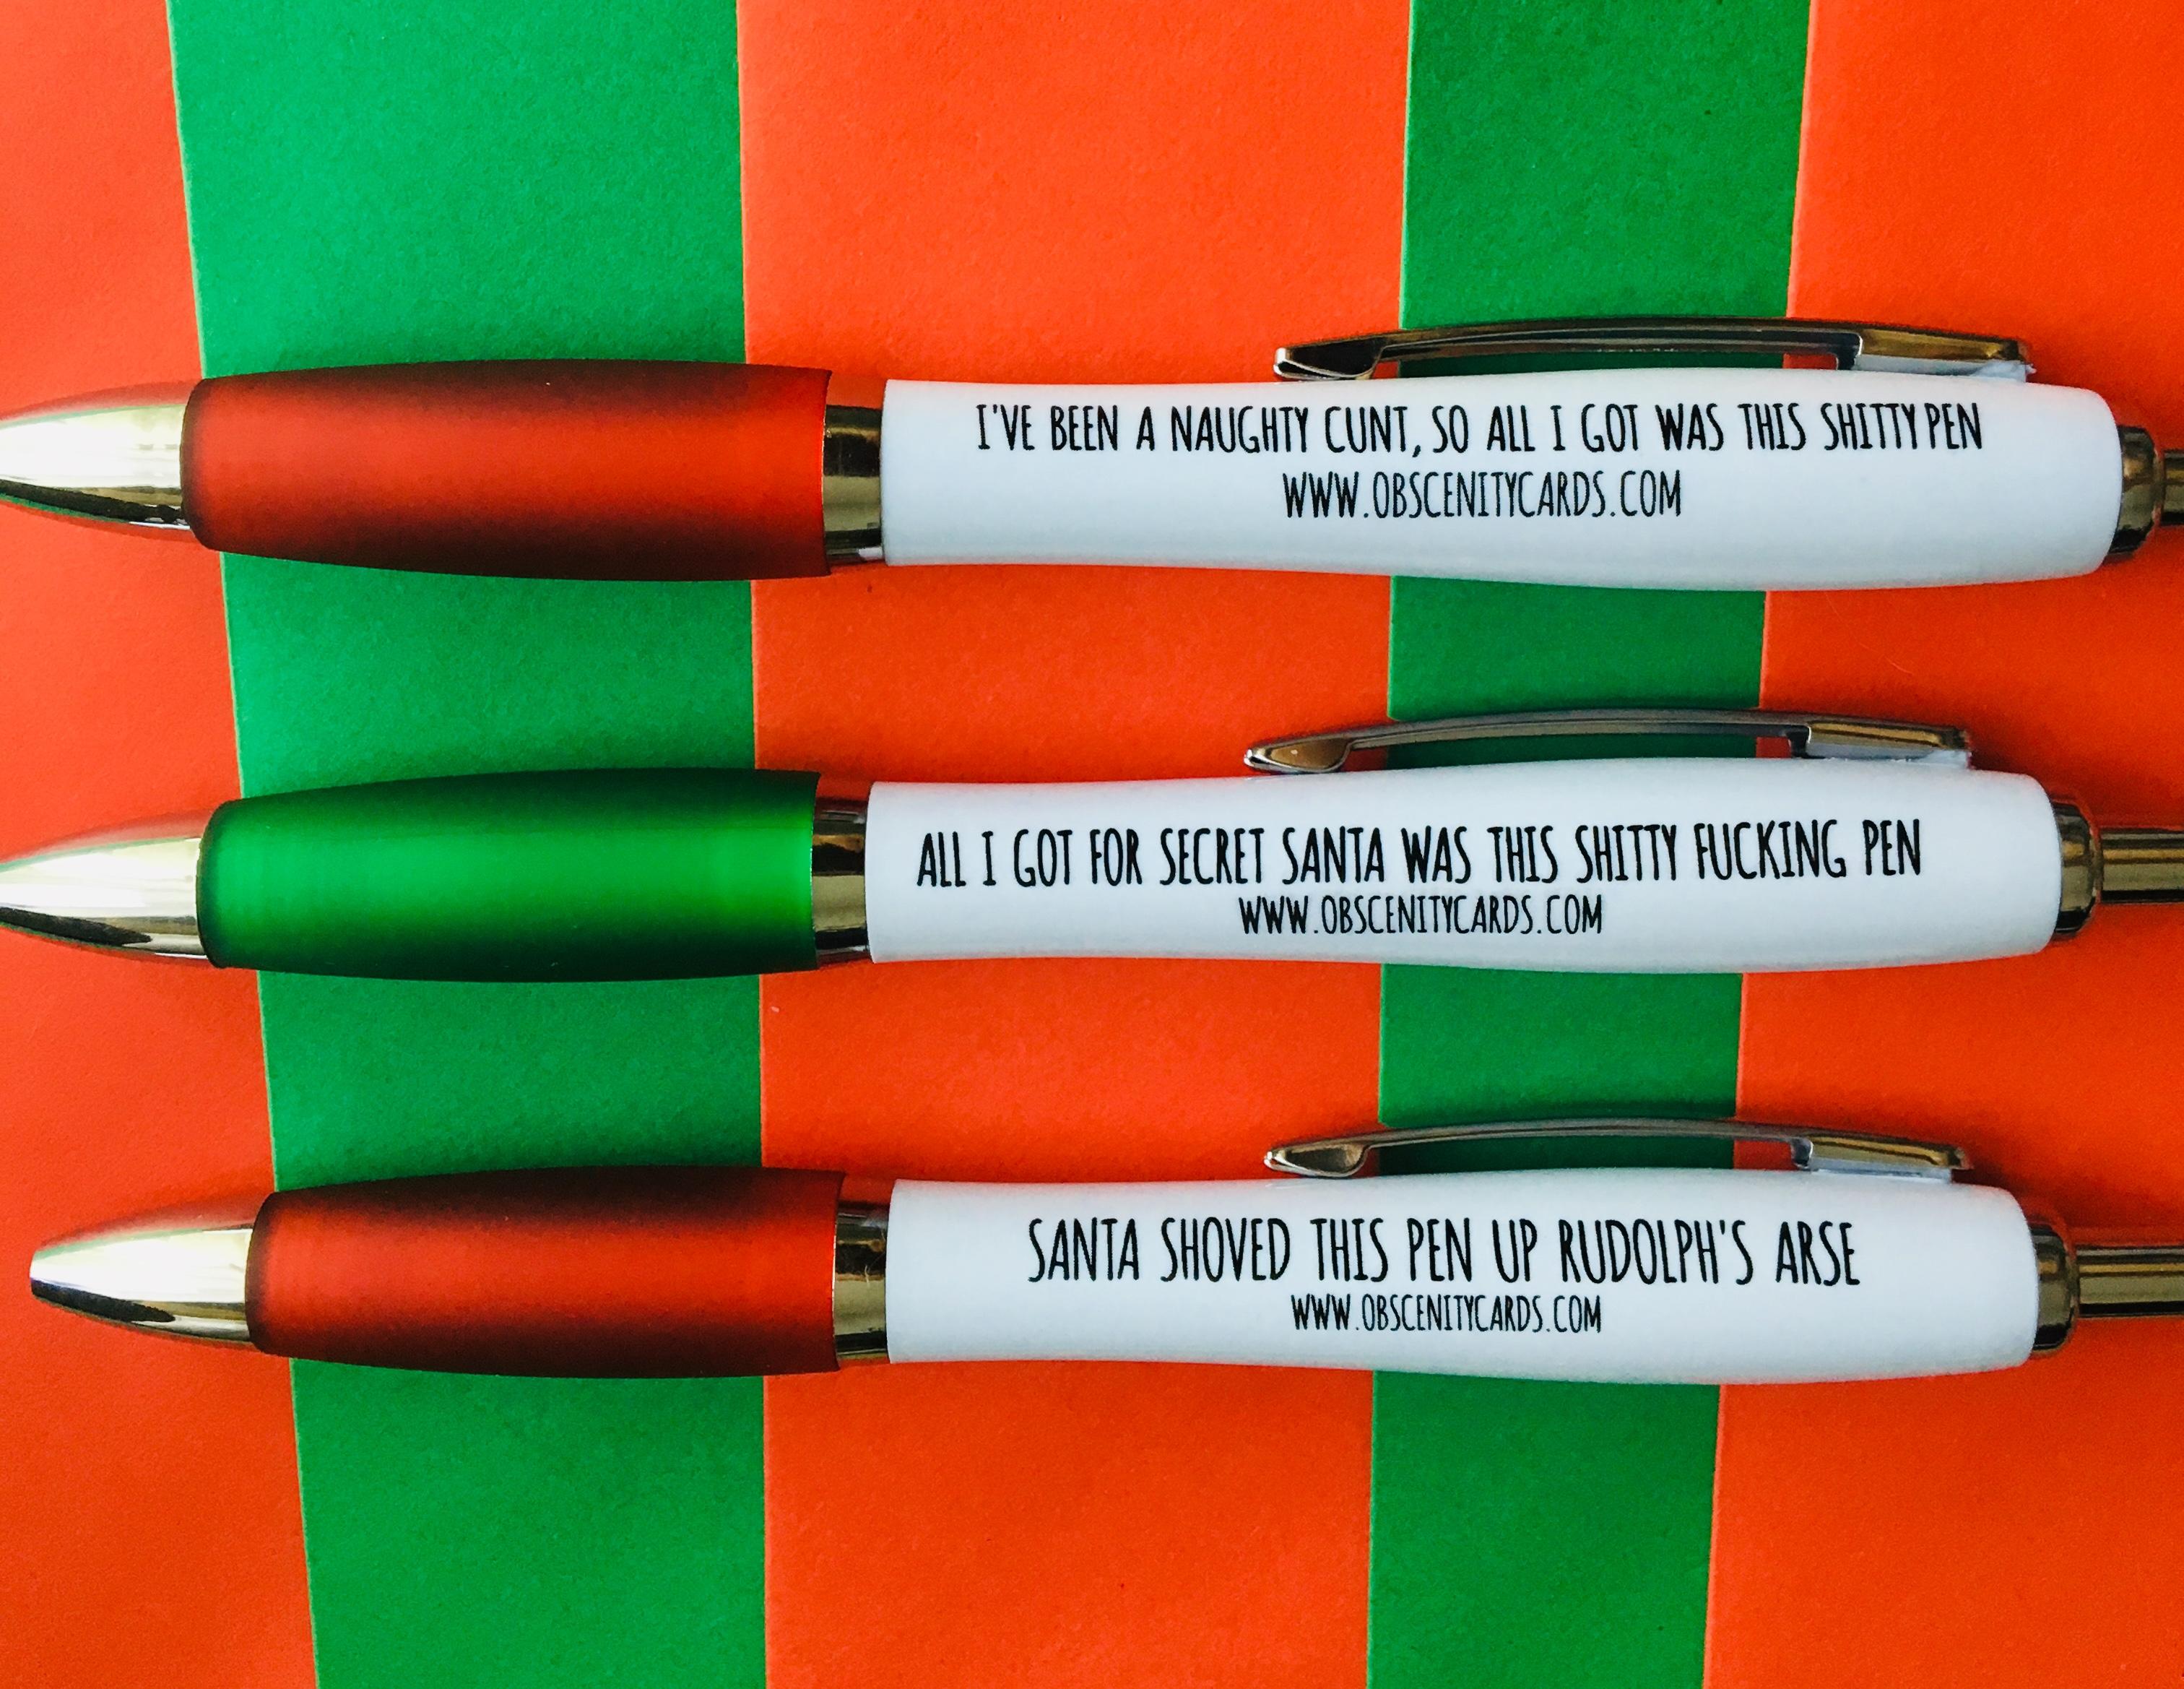 Obscene funny christmas pens. Obscene Funny Cards, Pens, Party Hats, Key rings, Magnets, Lighters & Loads More!